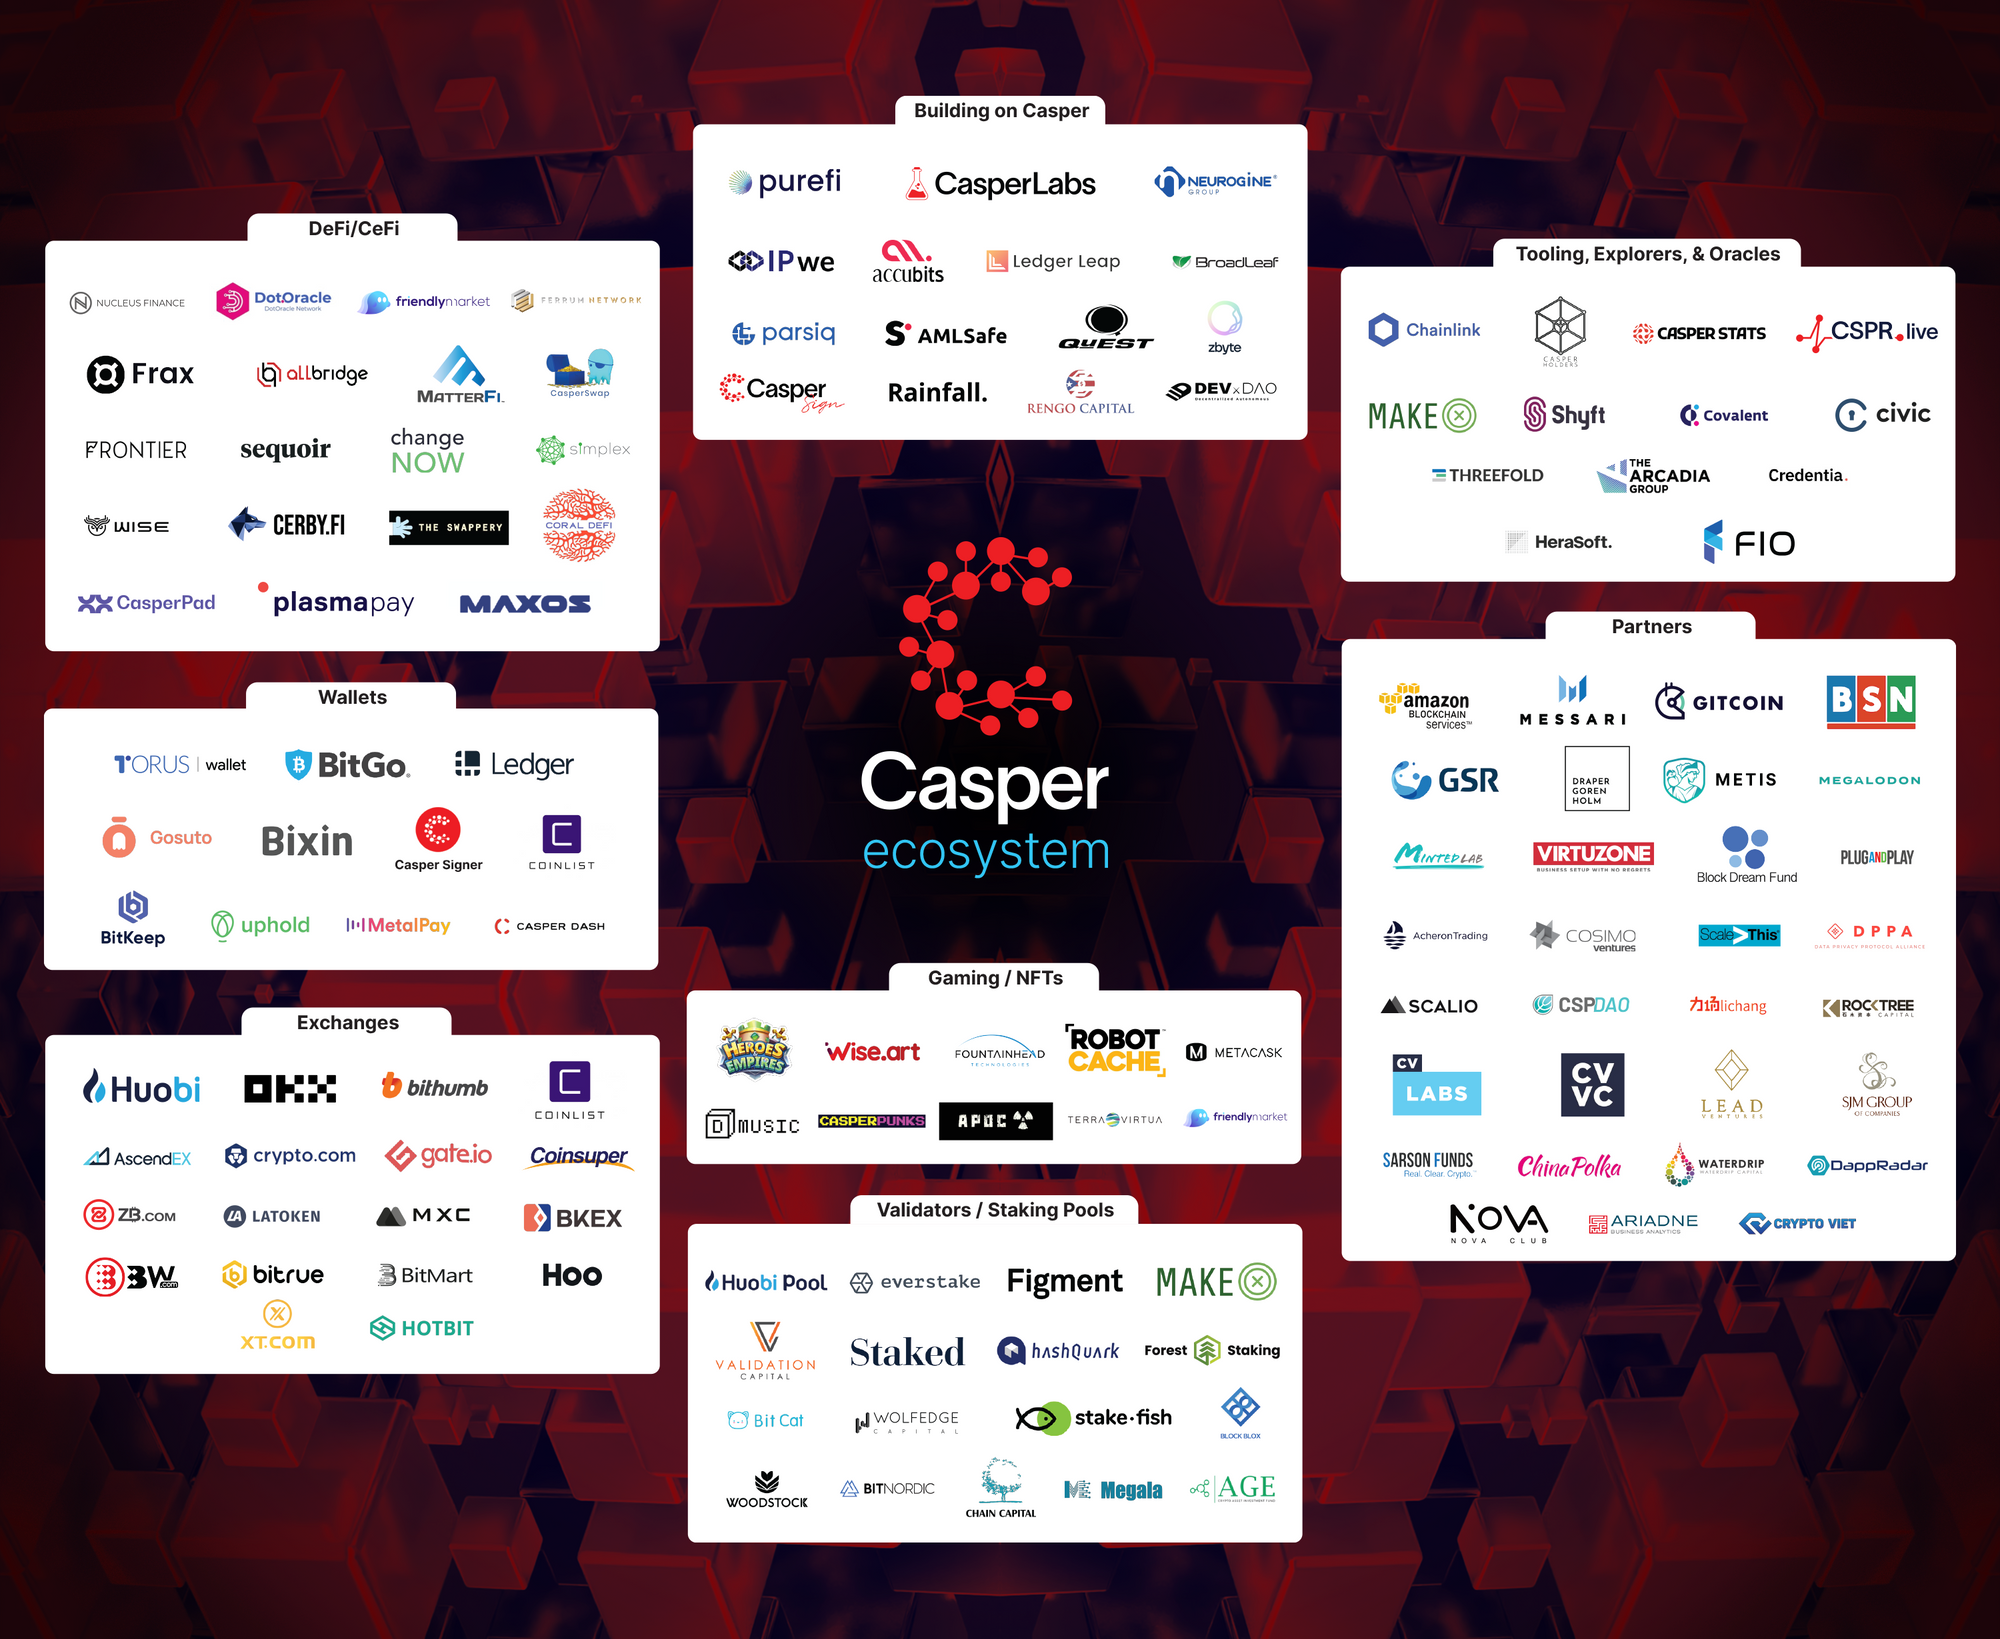 The State of Casper: A Year in Review